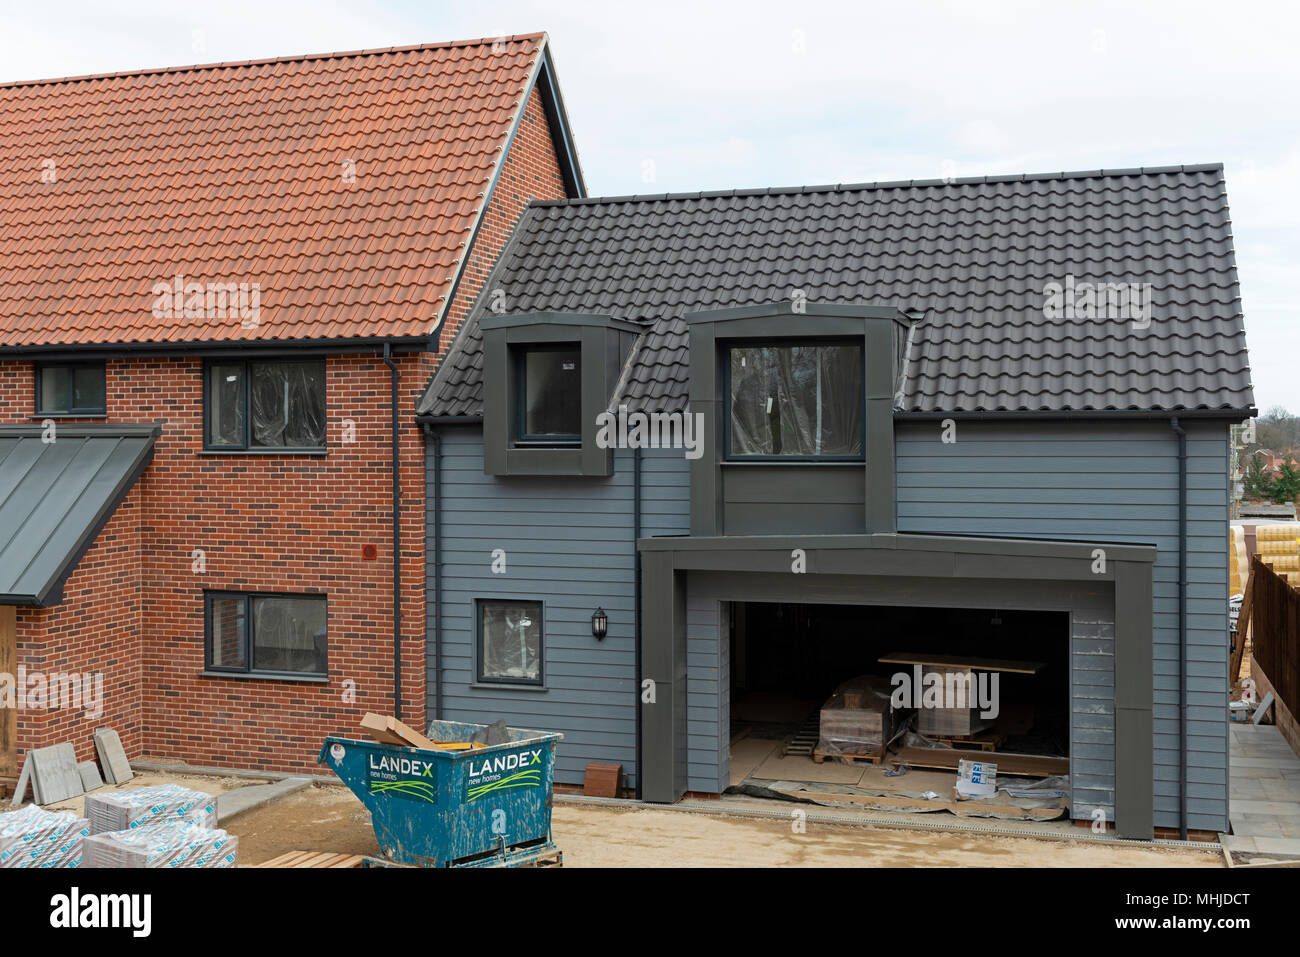 Newly built houses, Afford, Suffolk. UK. Stock Photo